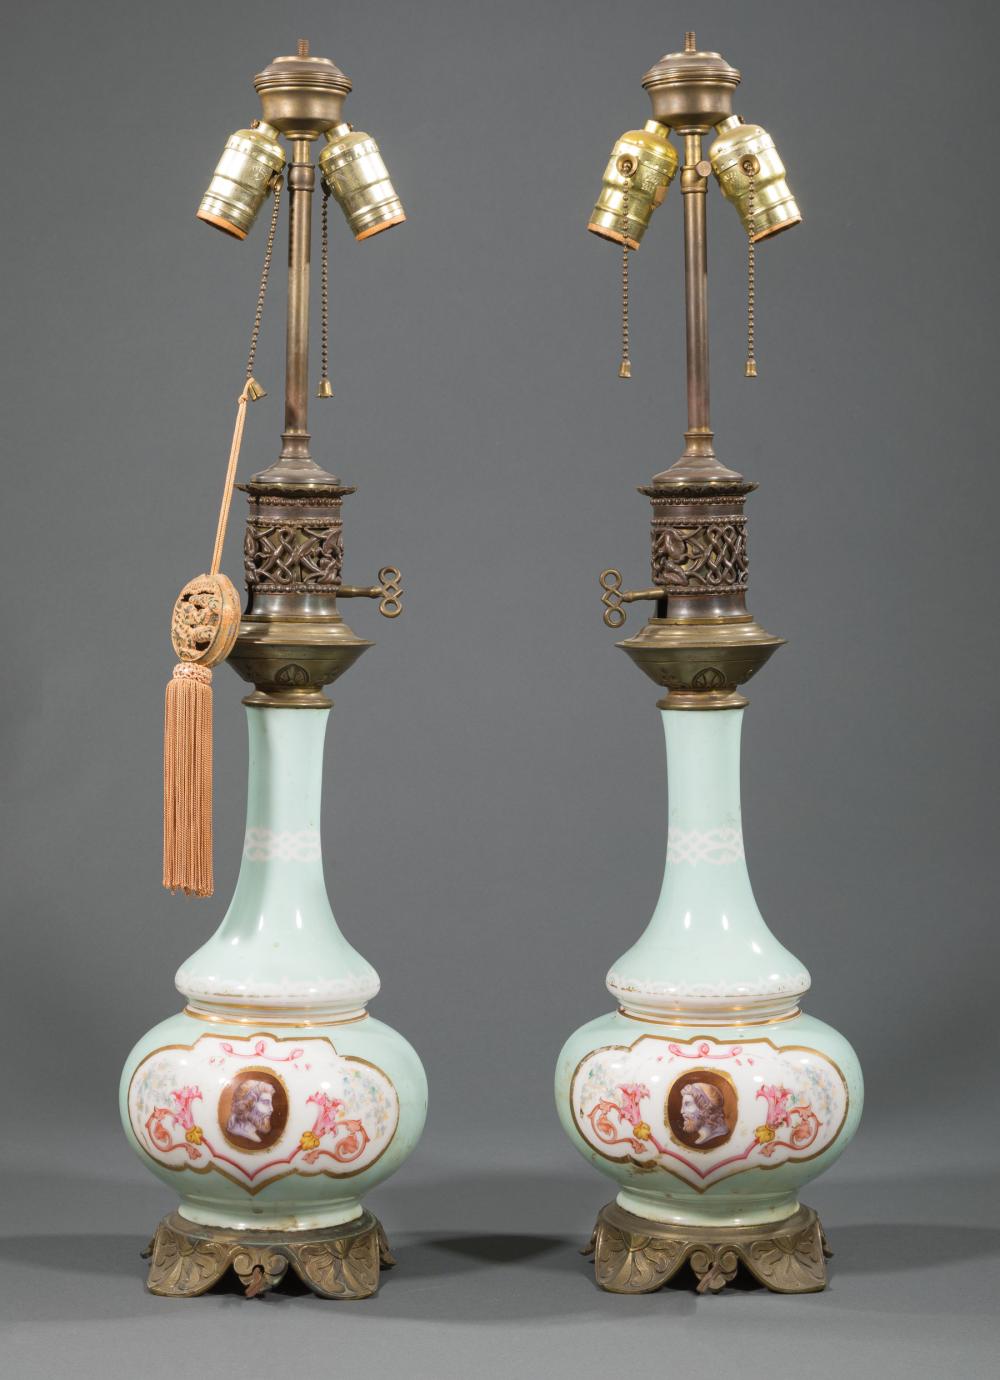 PAIR OF FRENCH PORCELAIN CARCEL